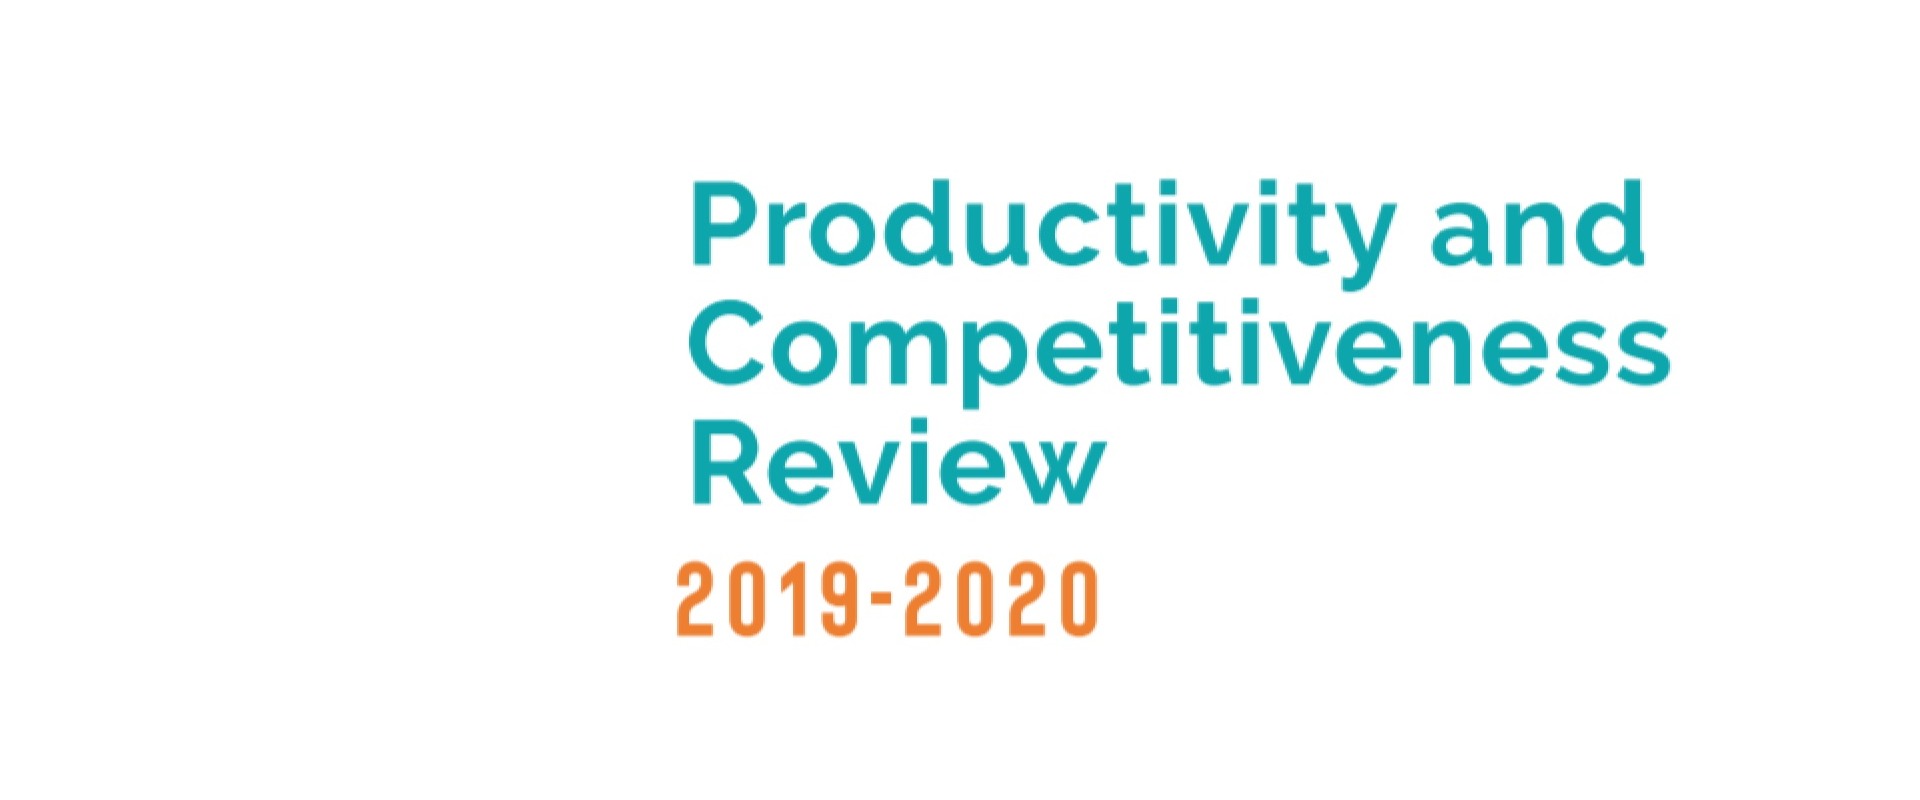 Productivity and Competitiveness Review 2020